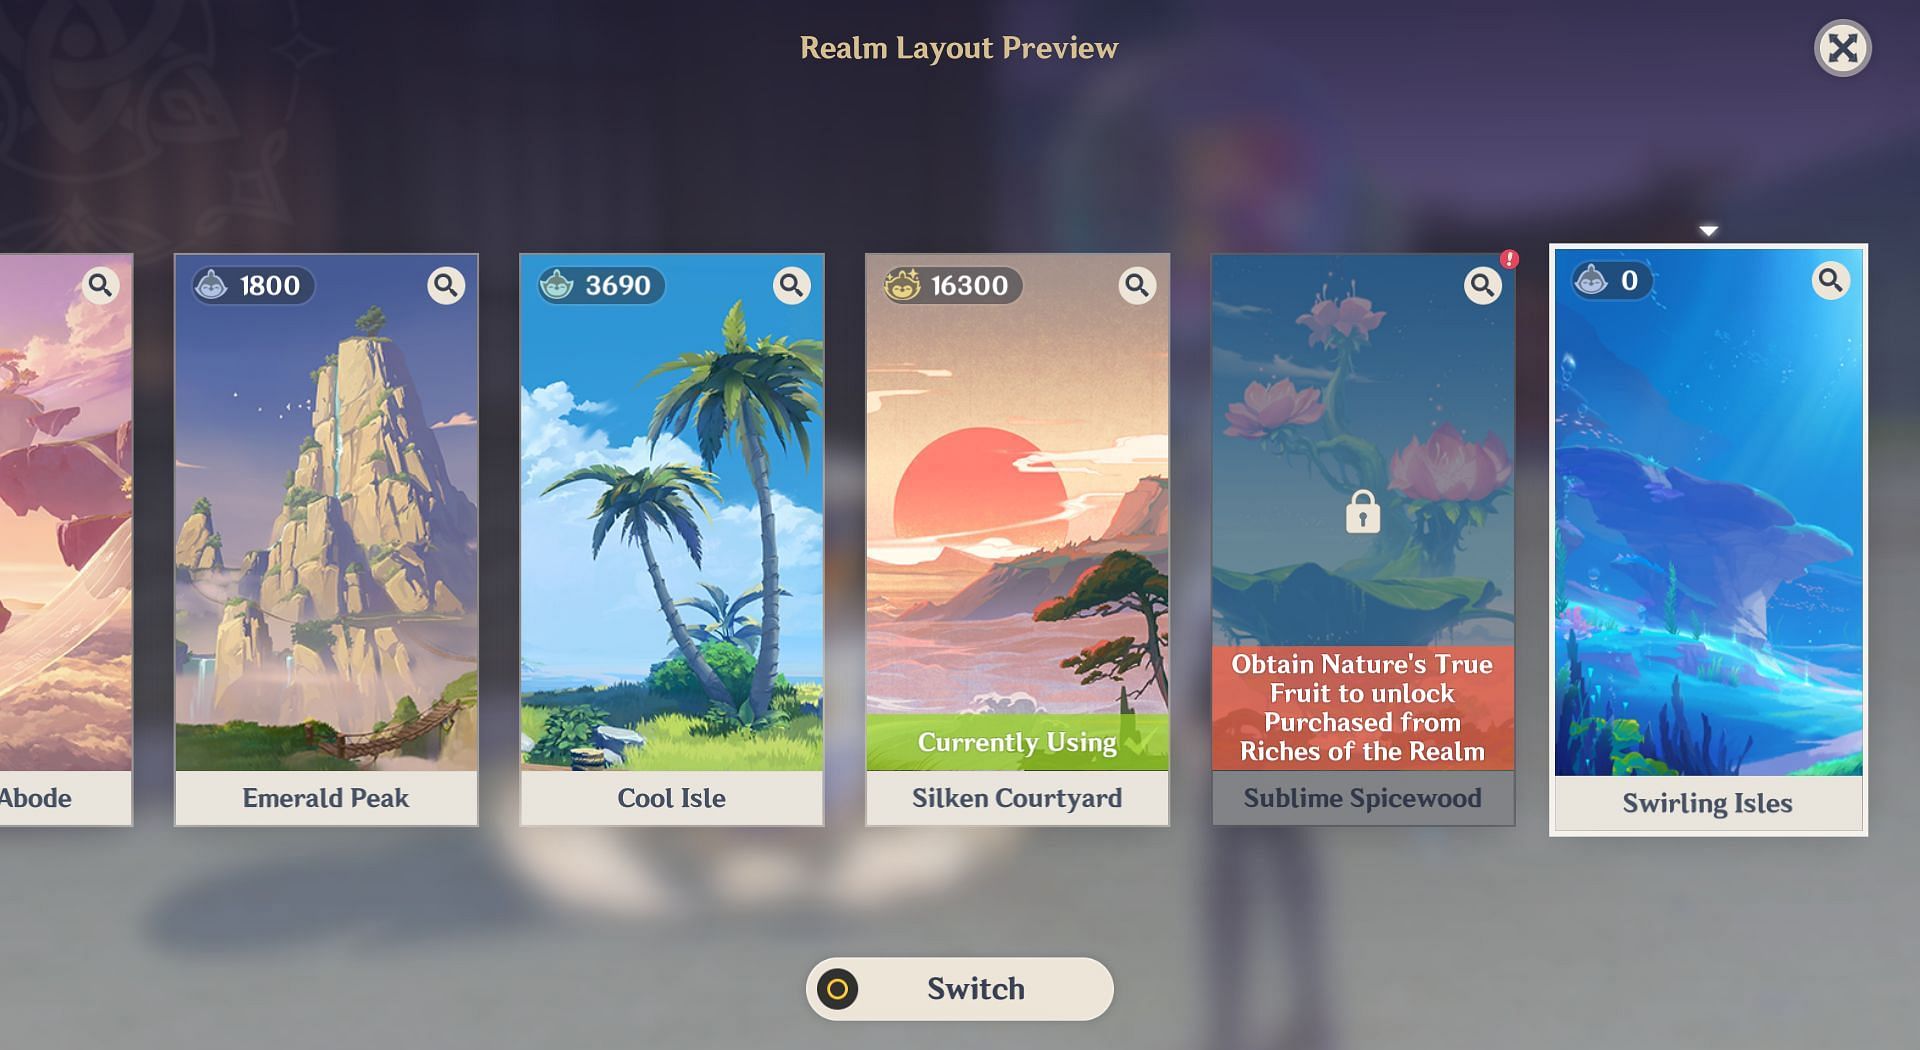 Talk to Tubby to switch the layout (Image via HoYoverse)